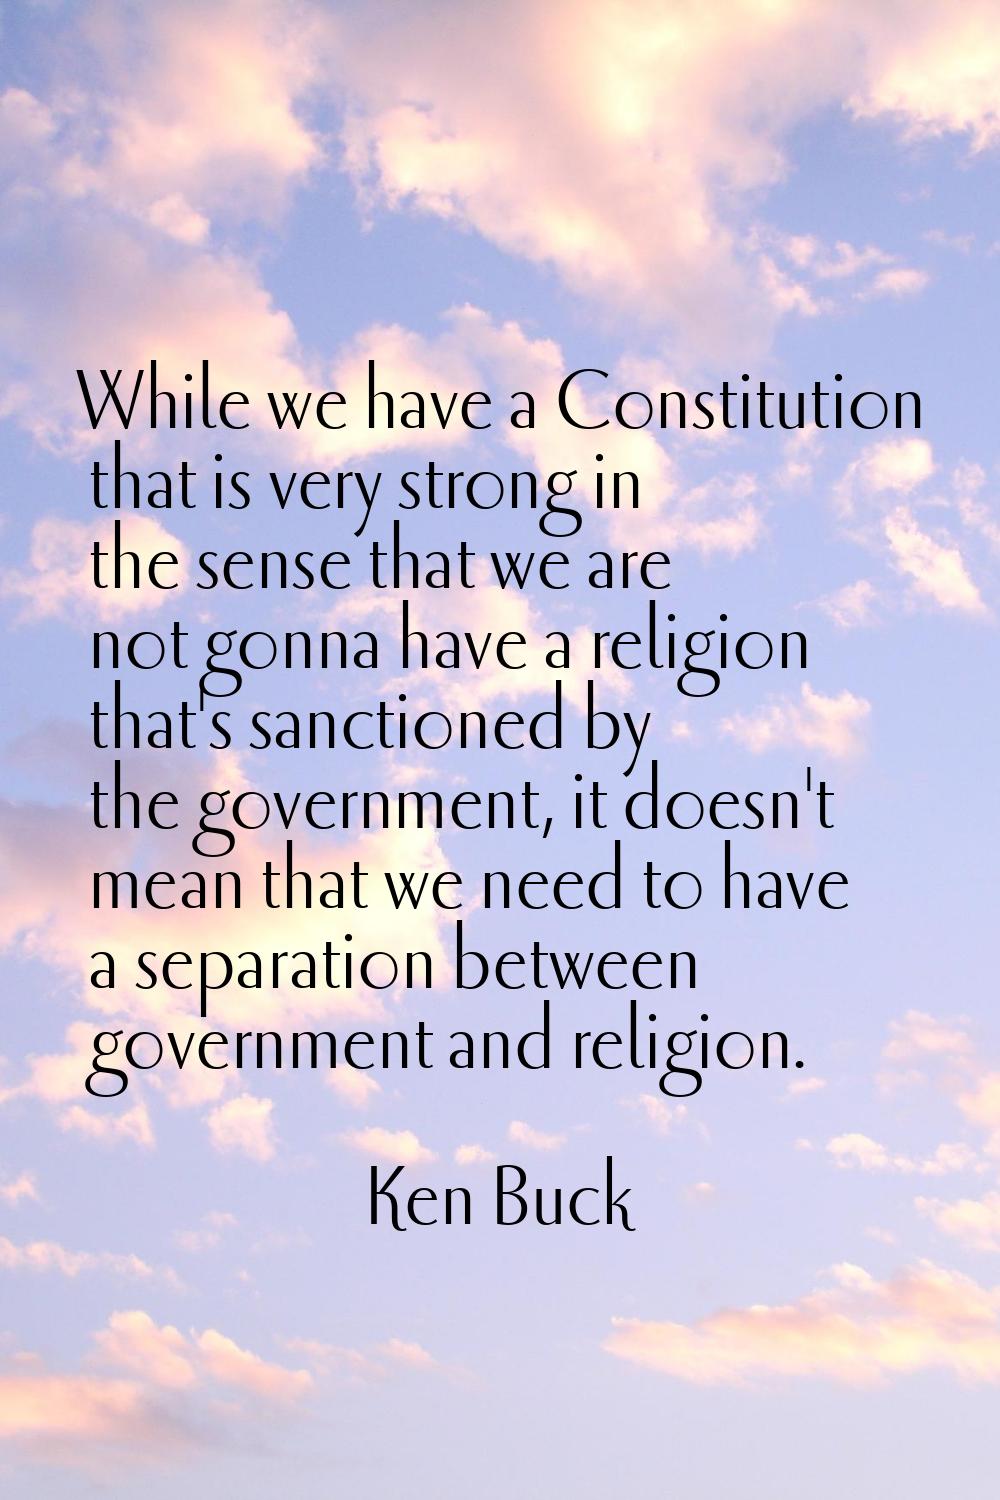 While we have a Constitution that is very strong in the sense that we are not gonna have a religion